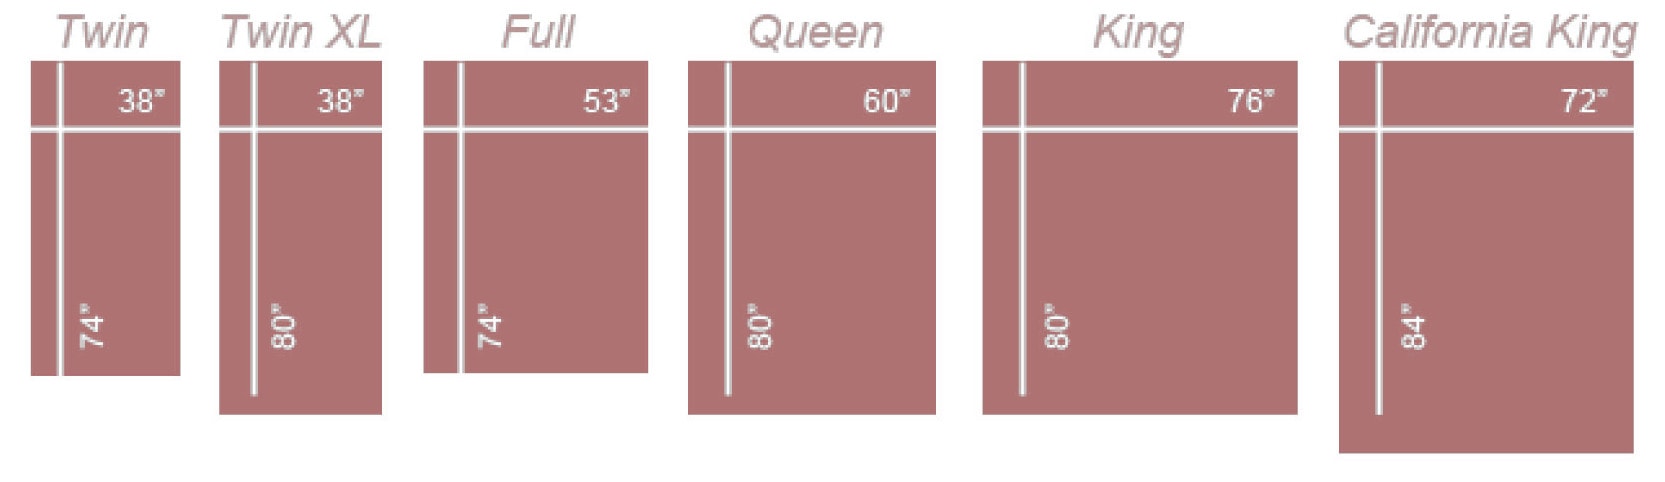 Queen vs. King Bed Size Comparison - What Size is Better? - Sleep Advisor